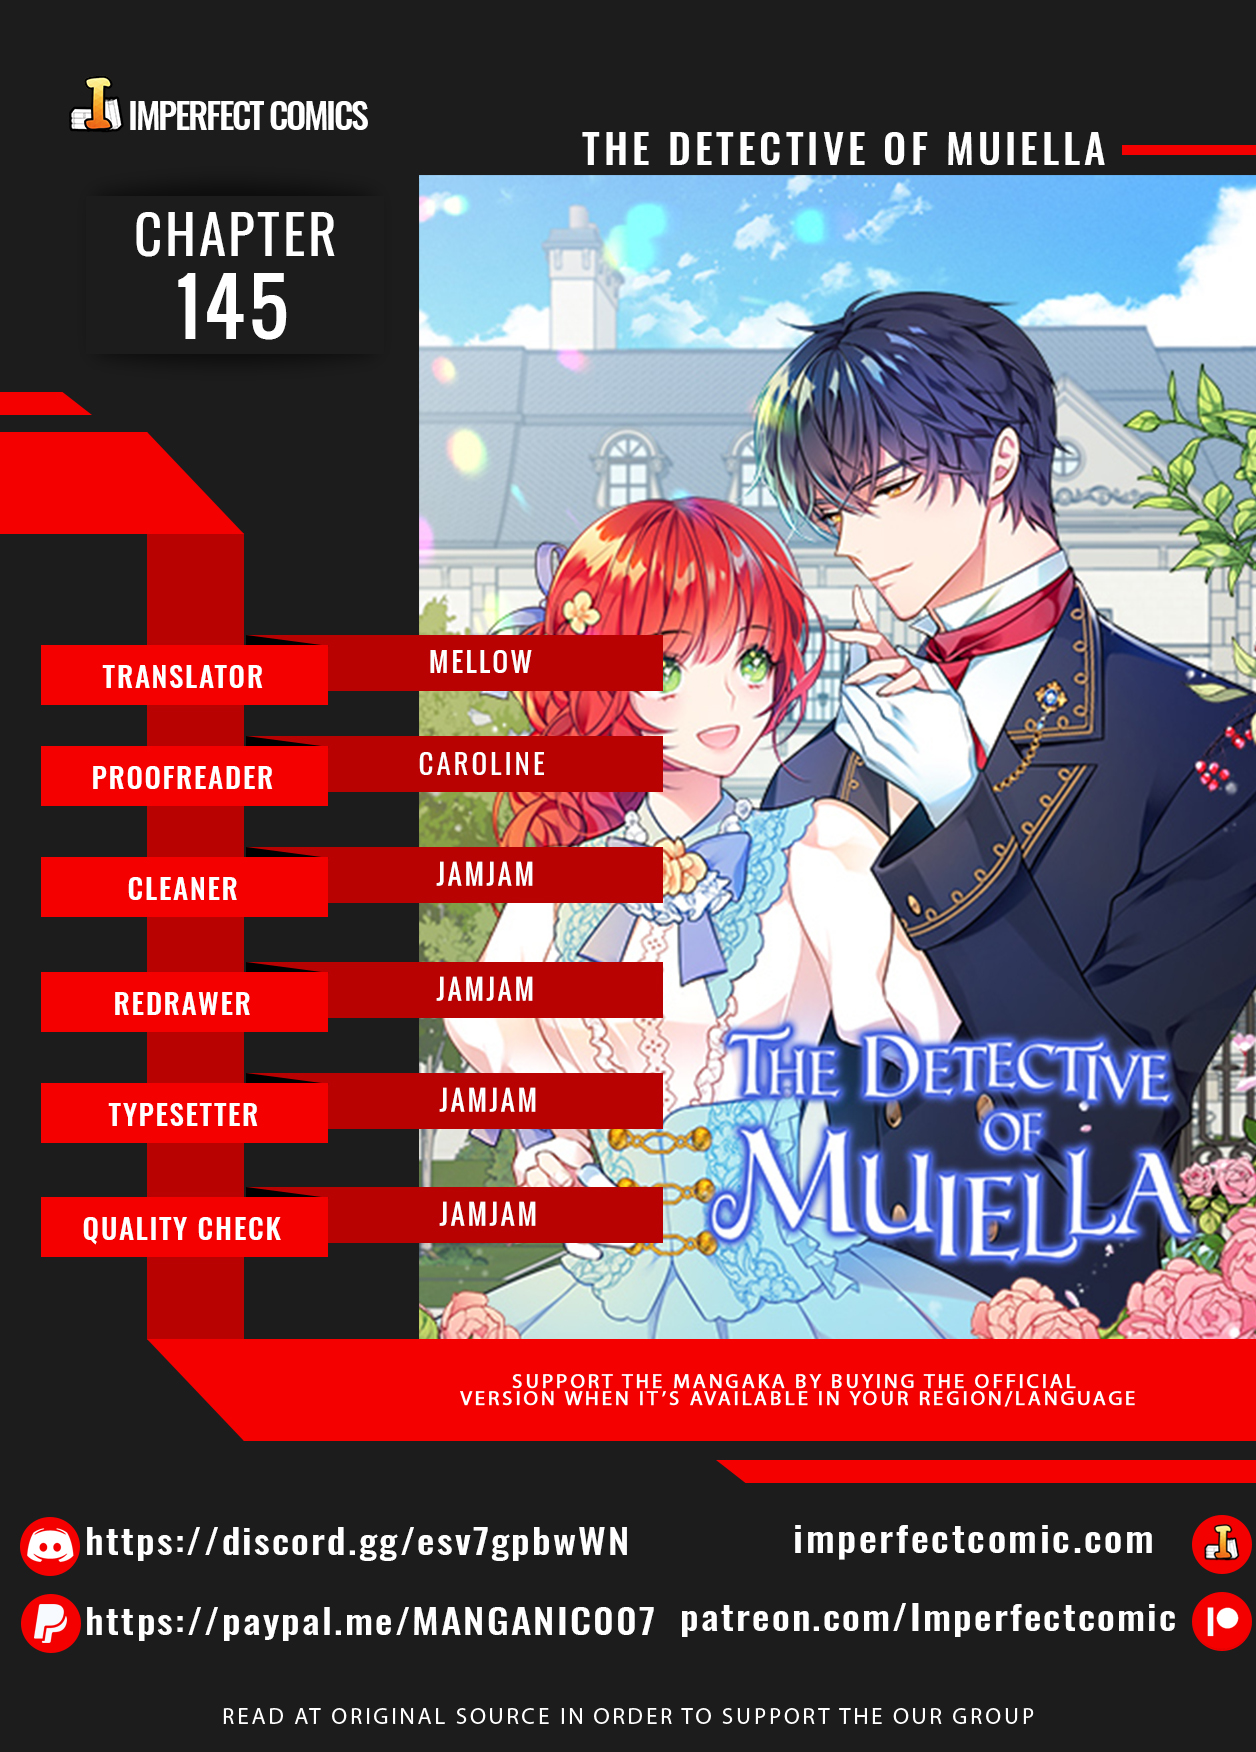 The Detective Of Muiella Chapter 145